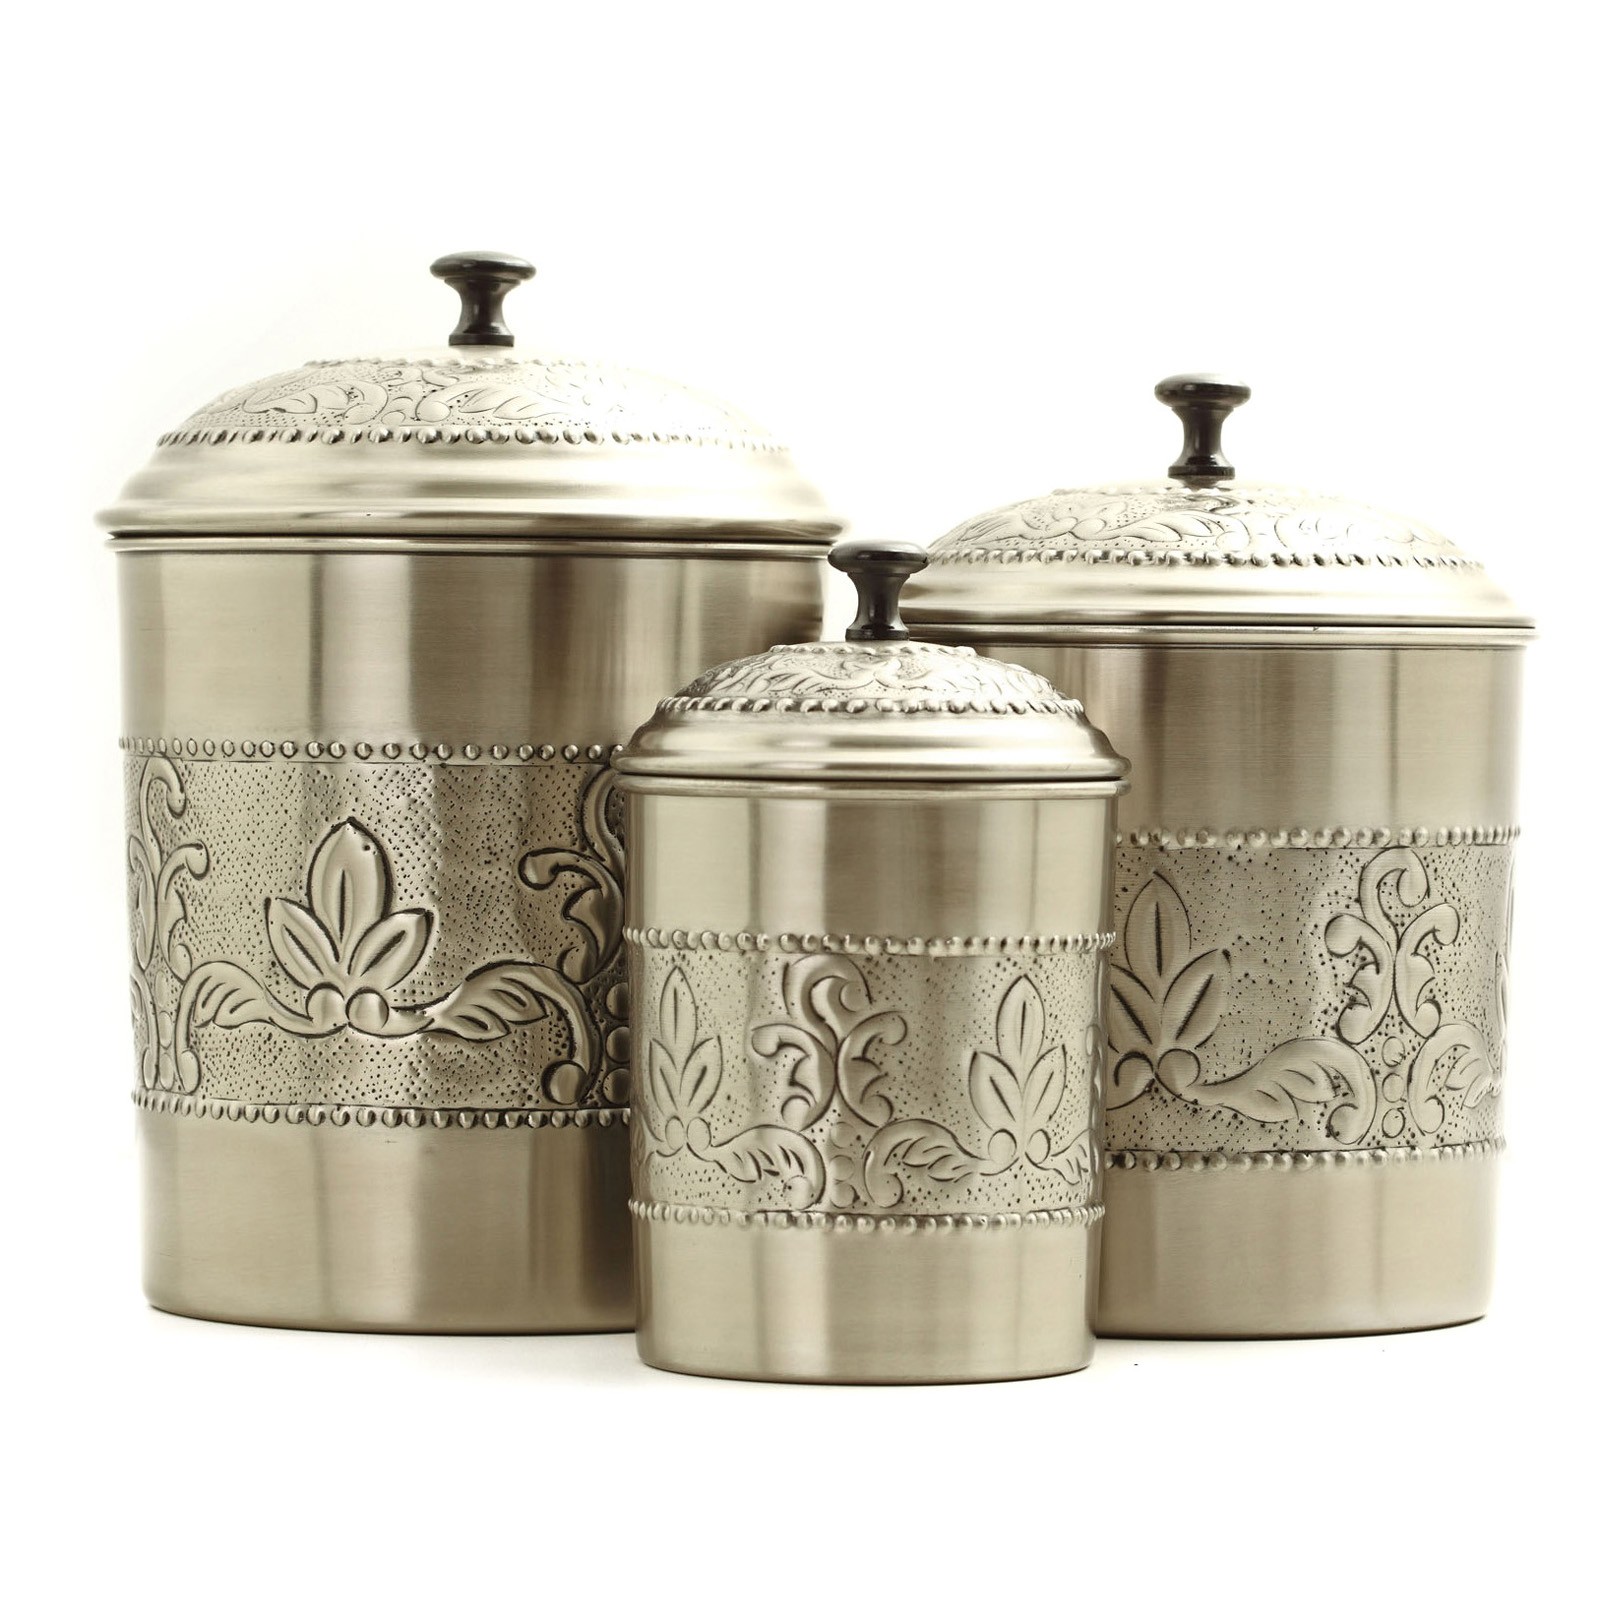 Unique Kitchen Canisters Sets Ideas on Foter